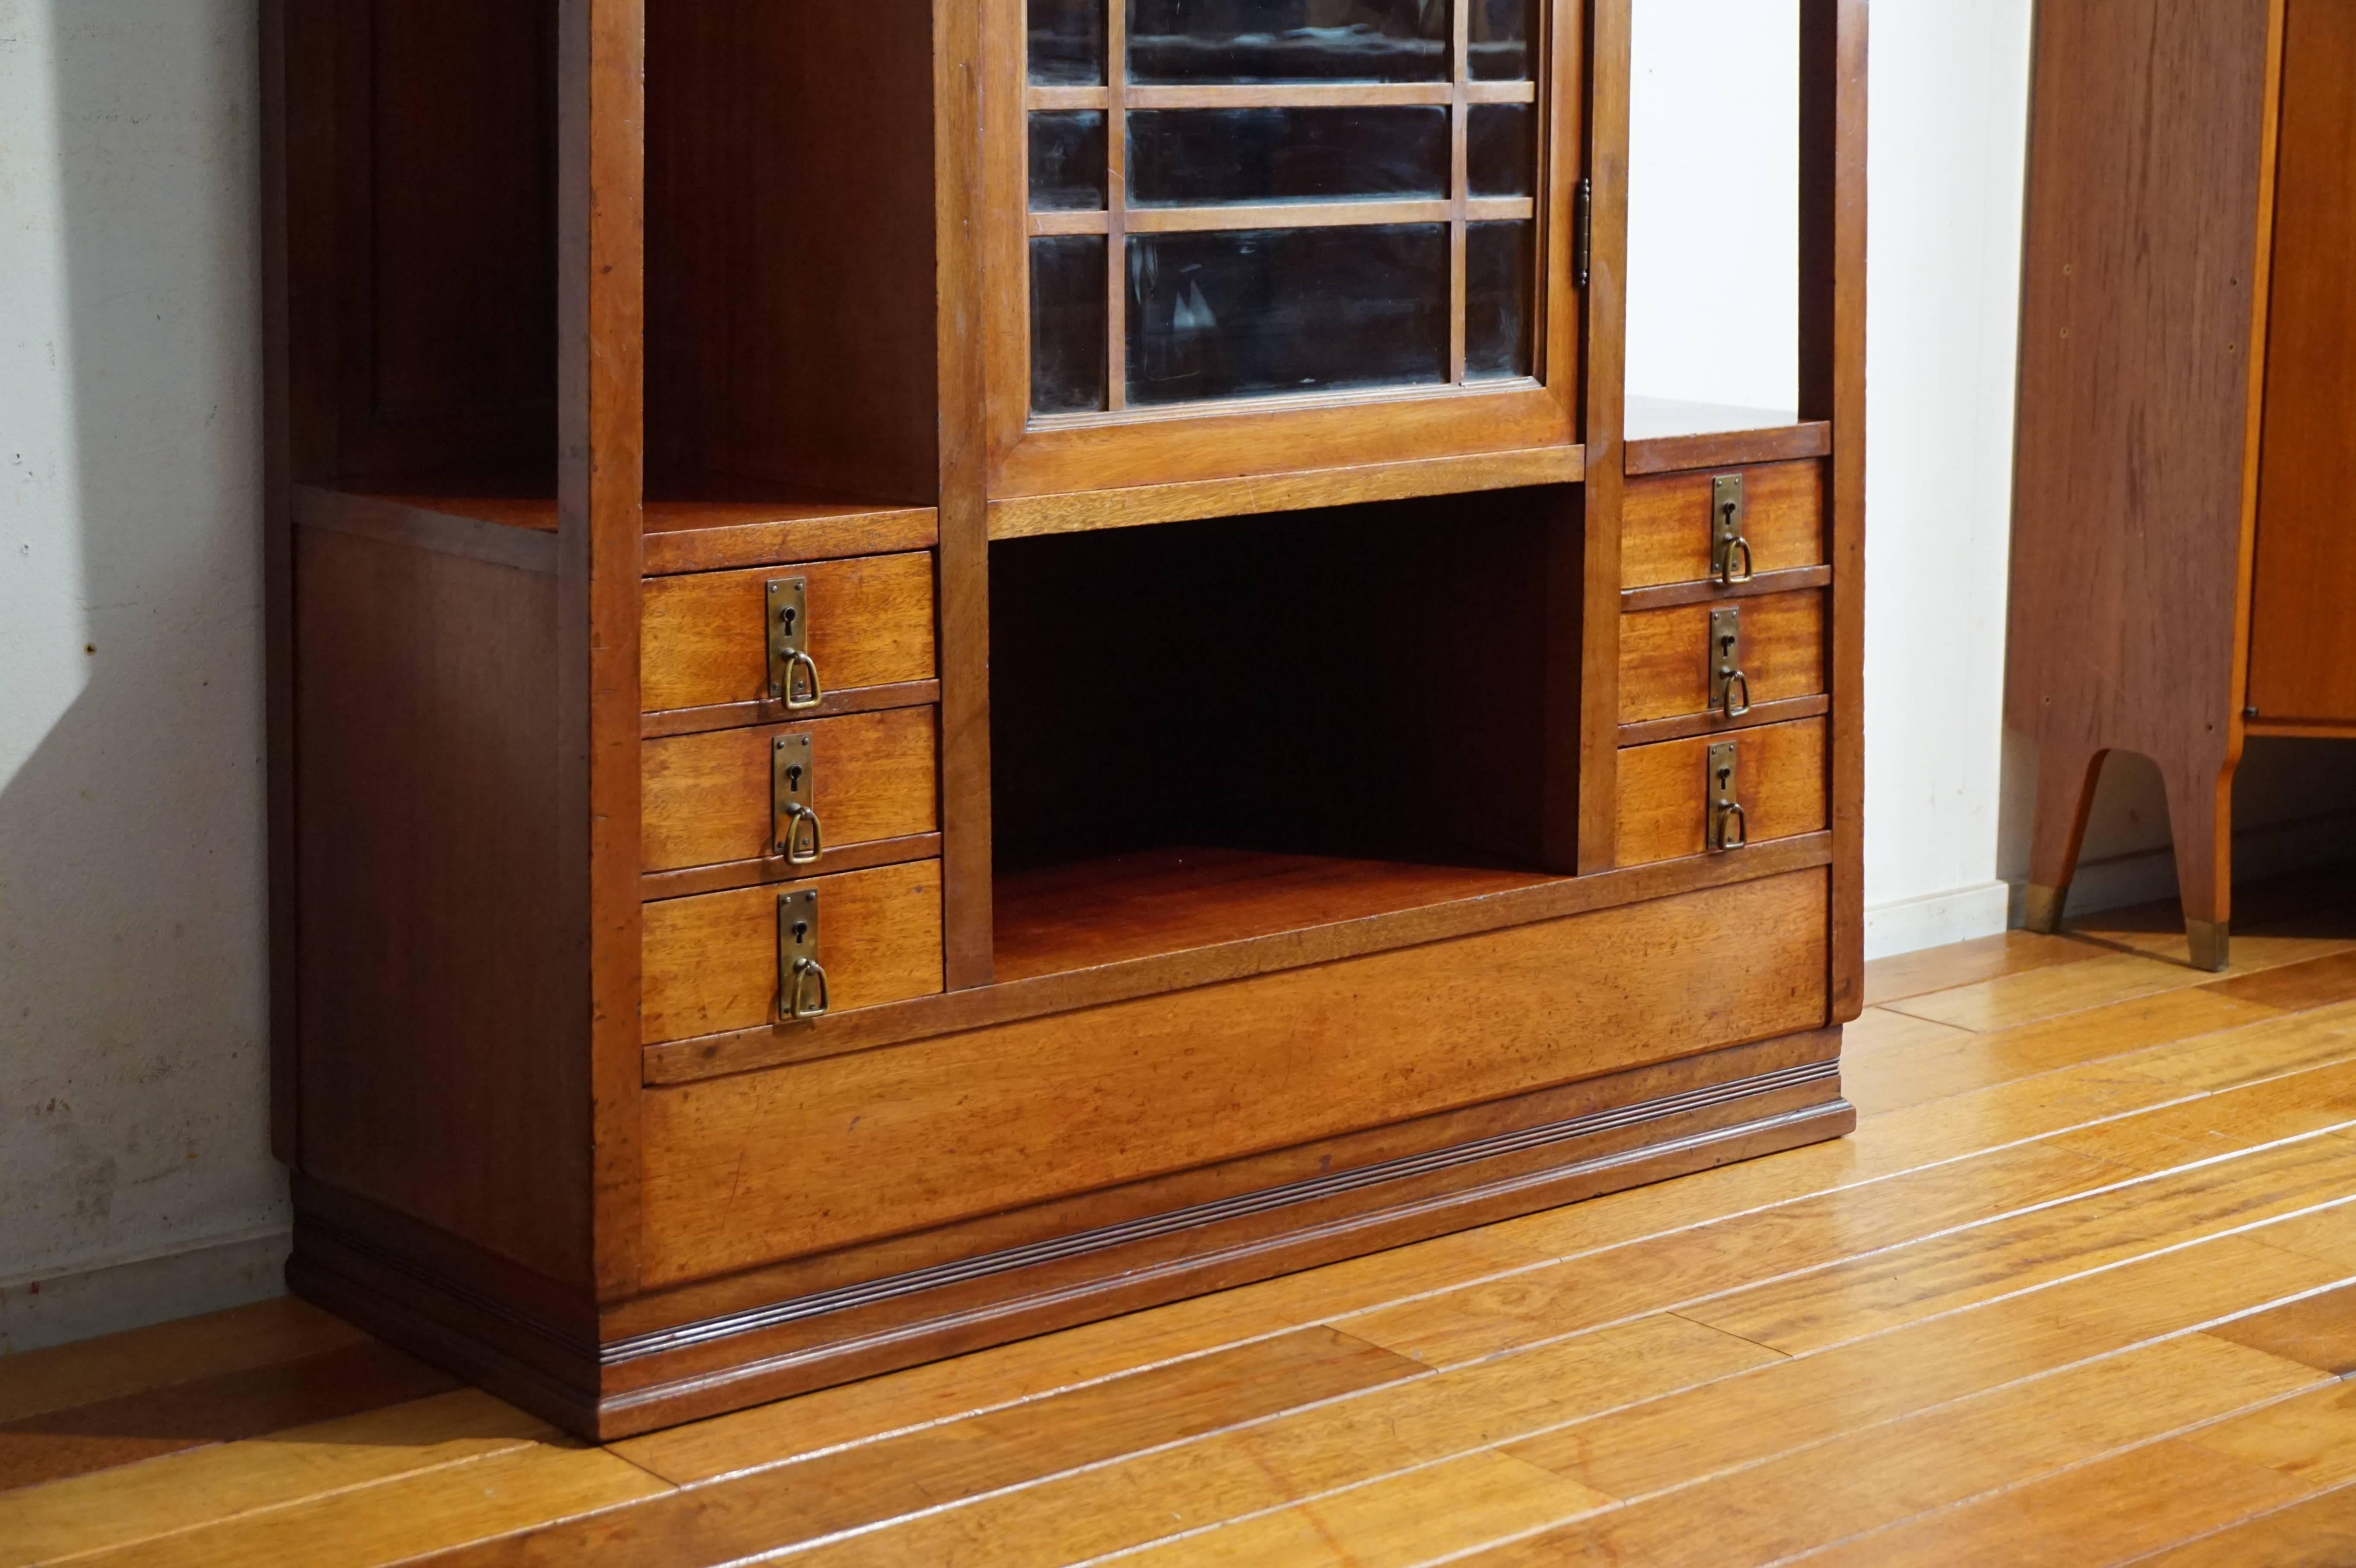 Dutch Early 20th Century Art Nouveau Display Cabinet with Drawers and Pilars for Vases